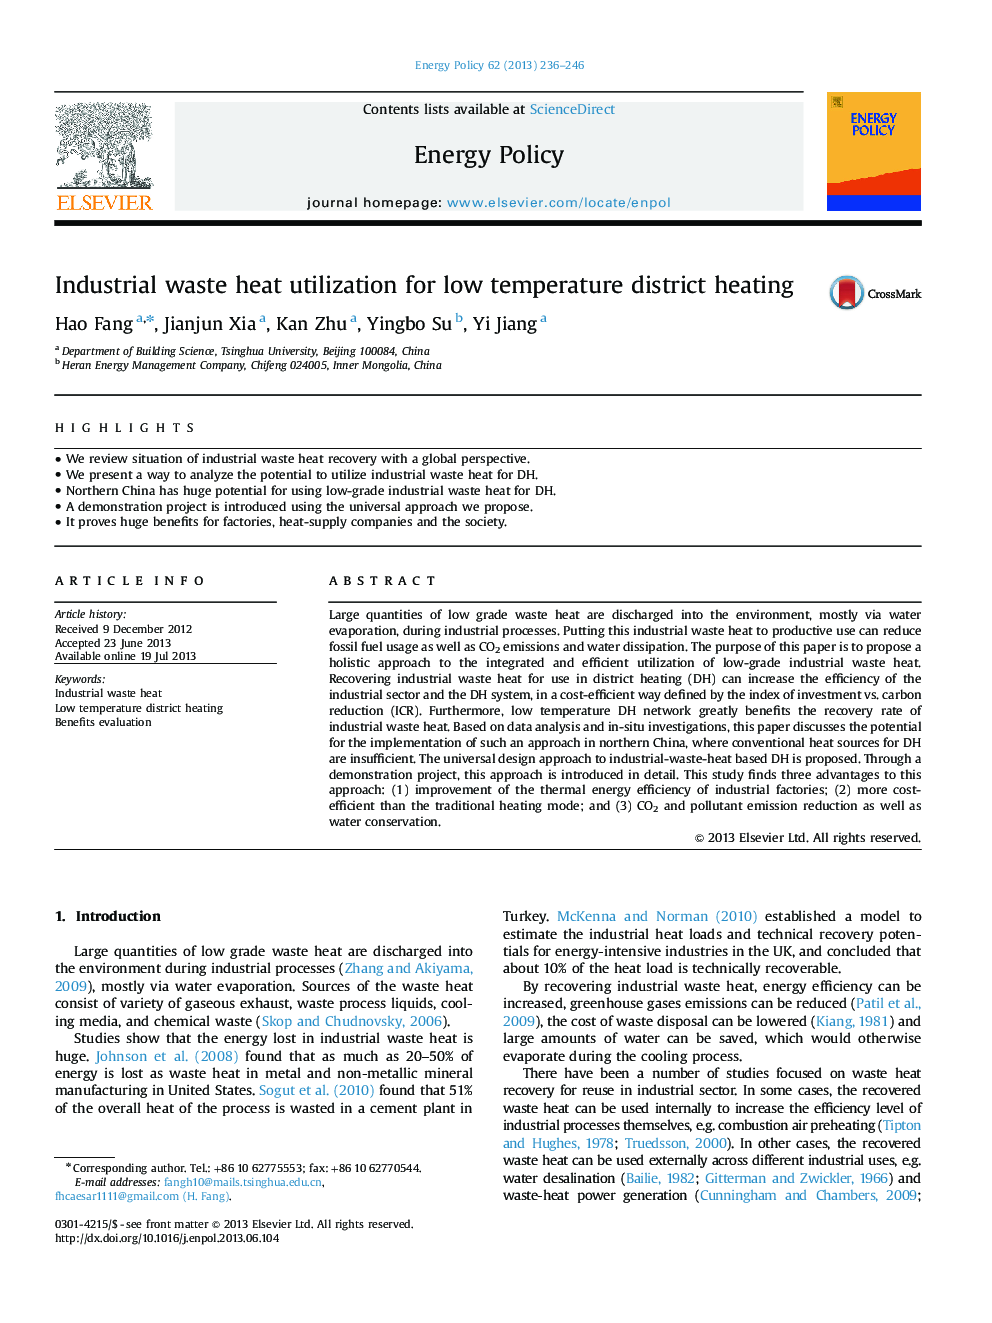 Industrial waste heat utilization for low temperature district heating